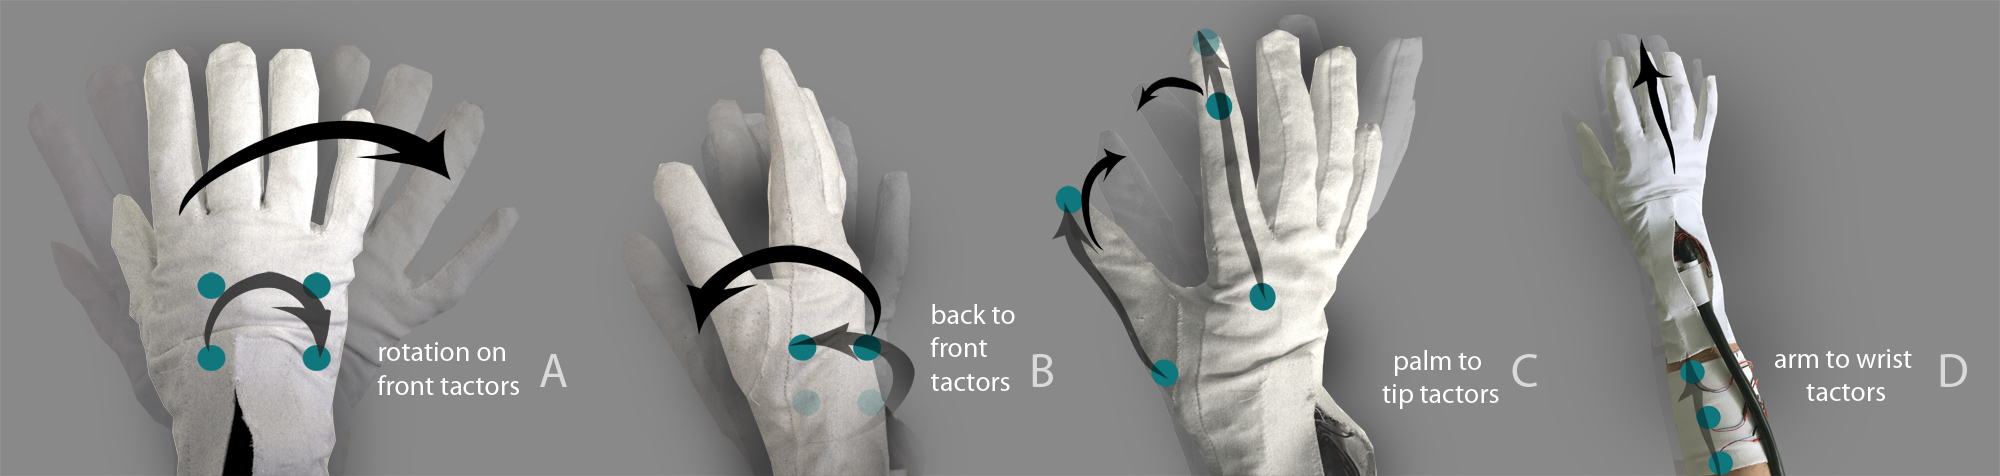 Tactile Hand Motion and Pose Guidance for 3D Interaction